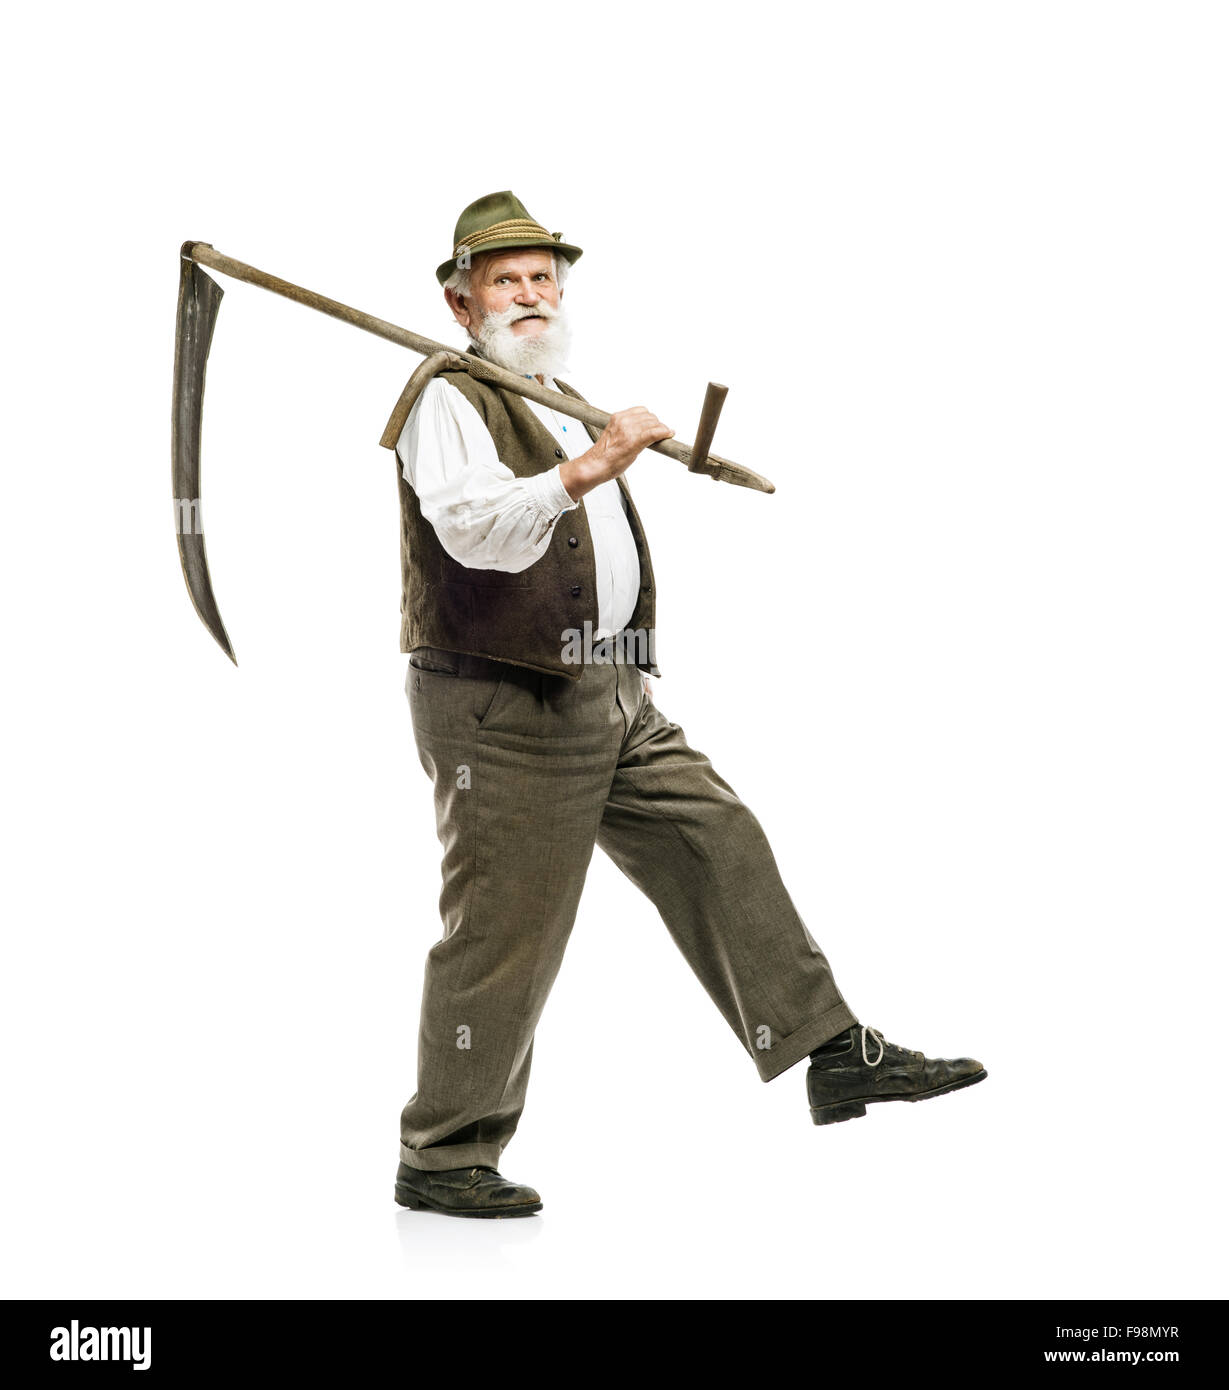 Albums 93+ Images what is the name of the bearded man who is holding a scythe Stunning